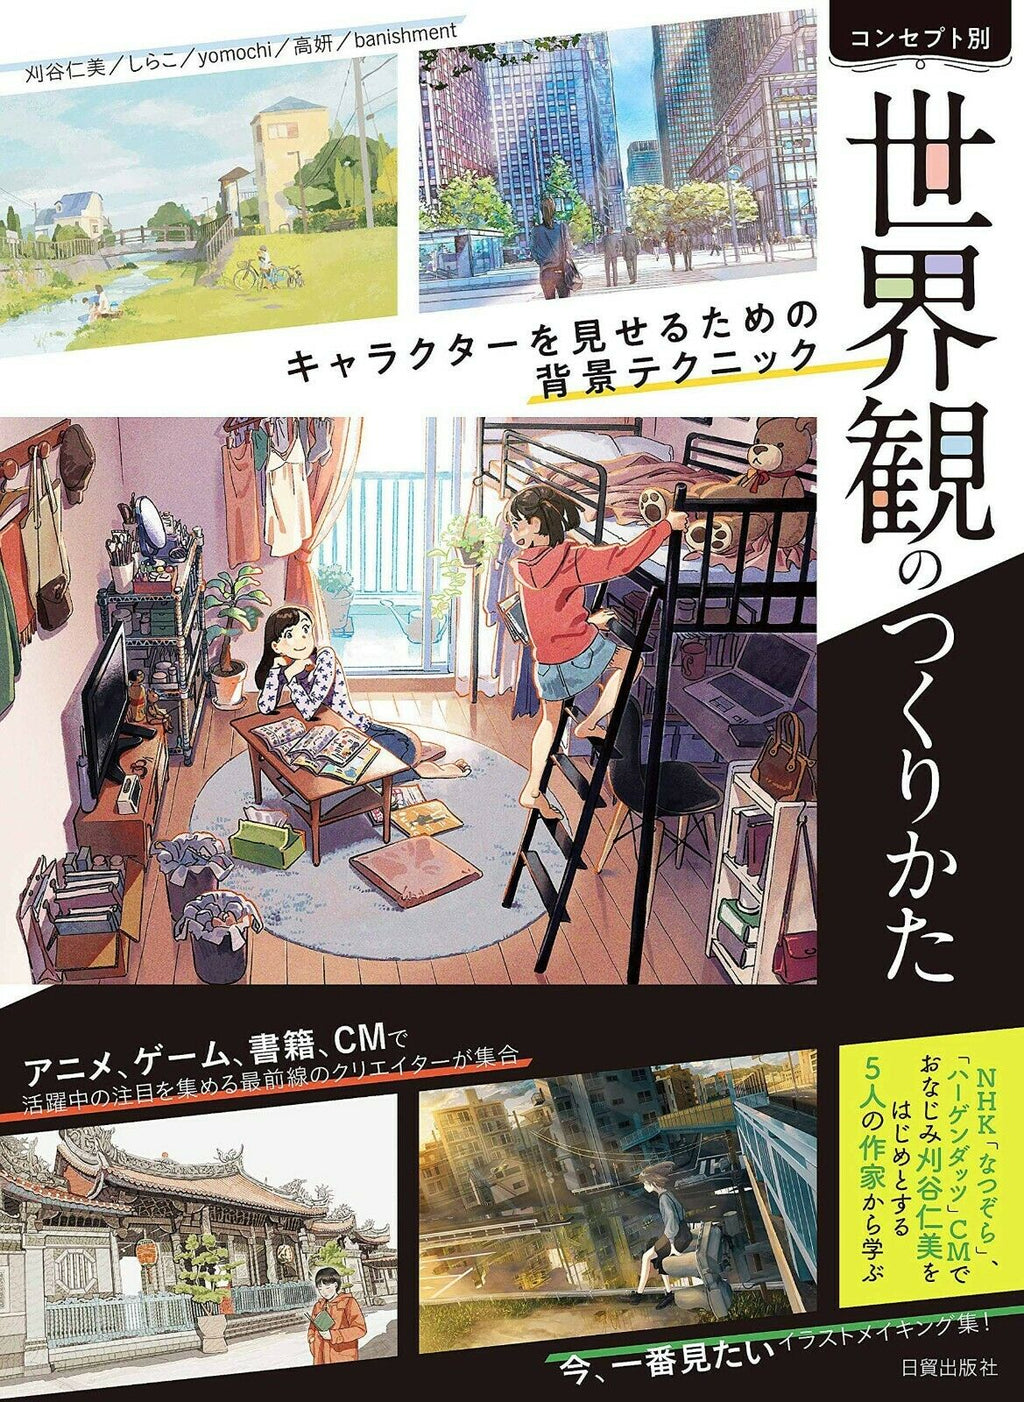 NEW' How To Draw Manga How To Create World View: Background Techniques | Japan